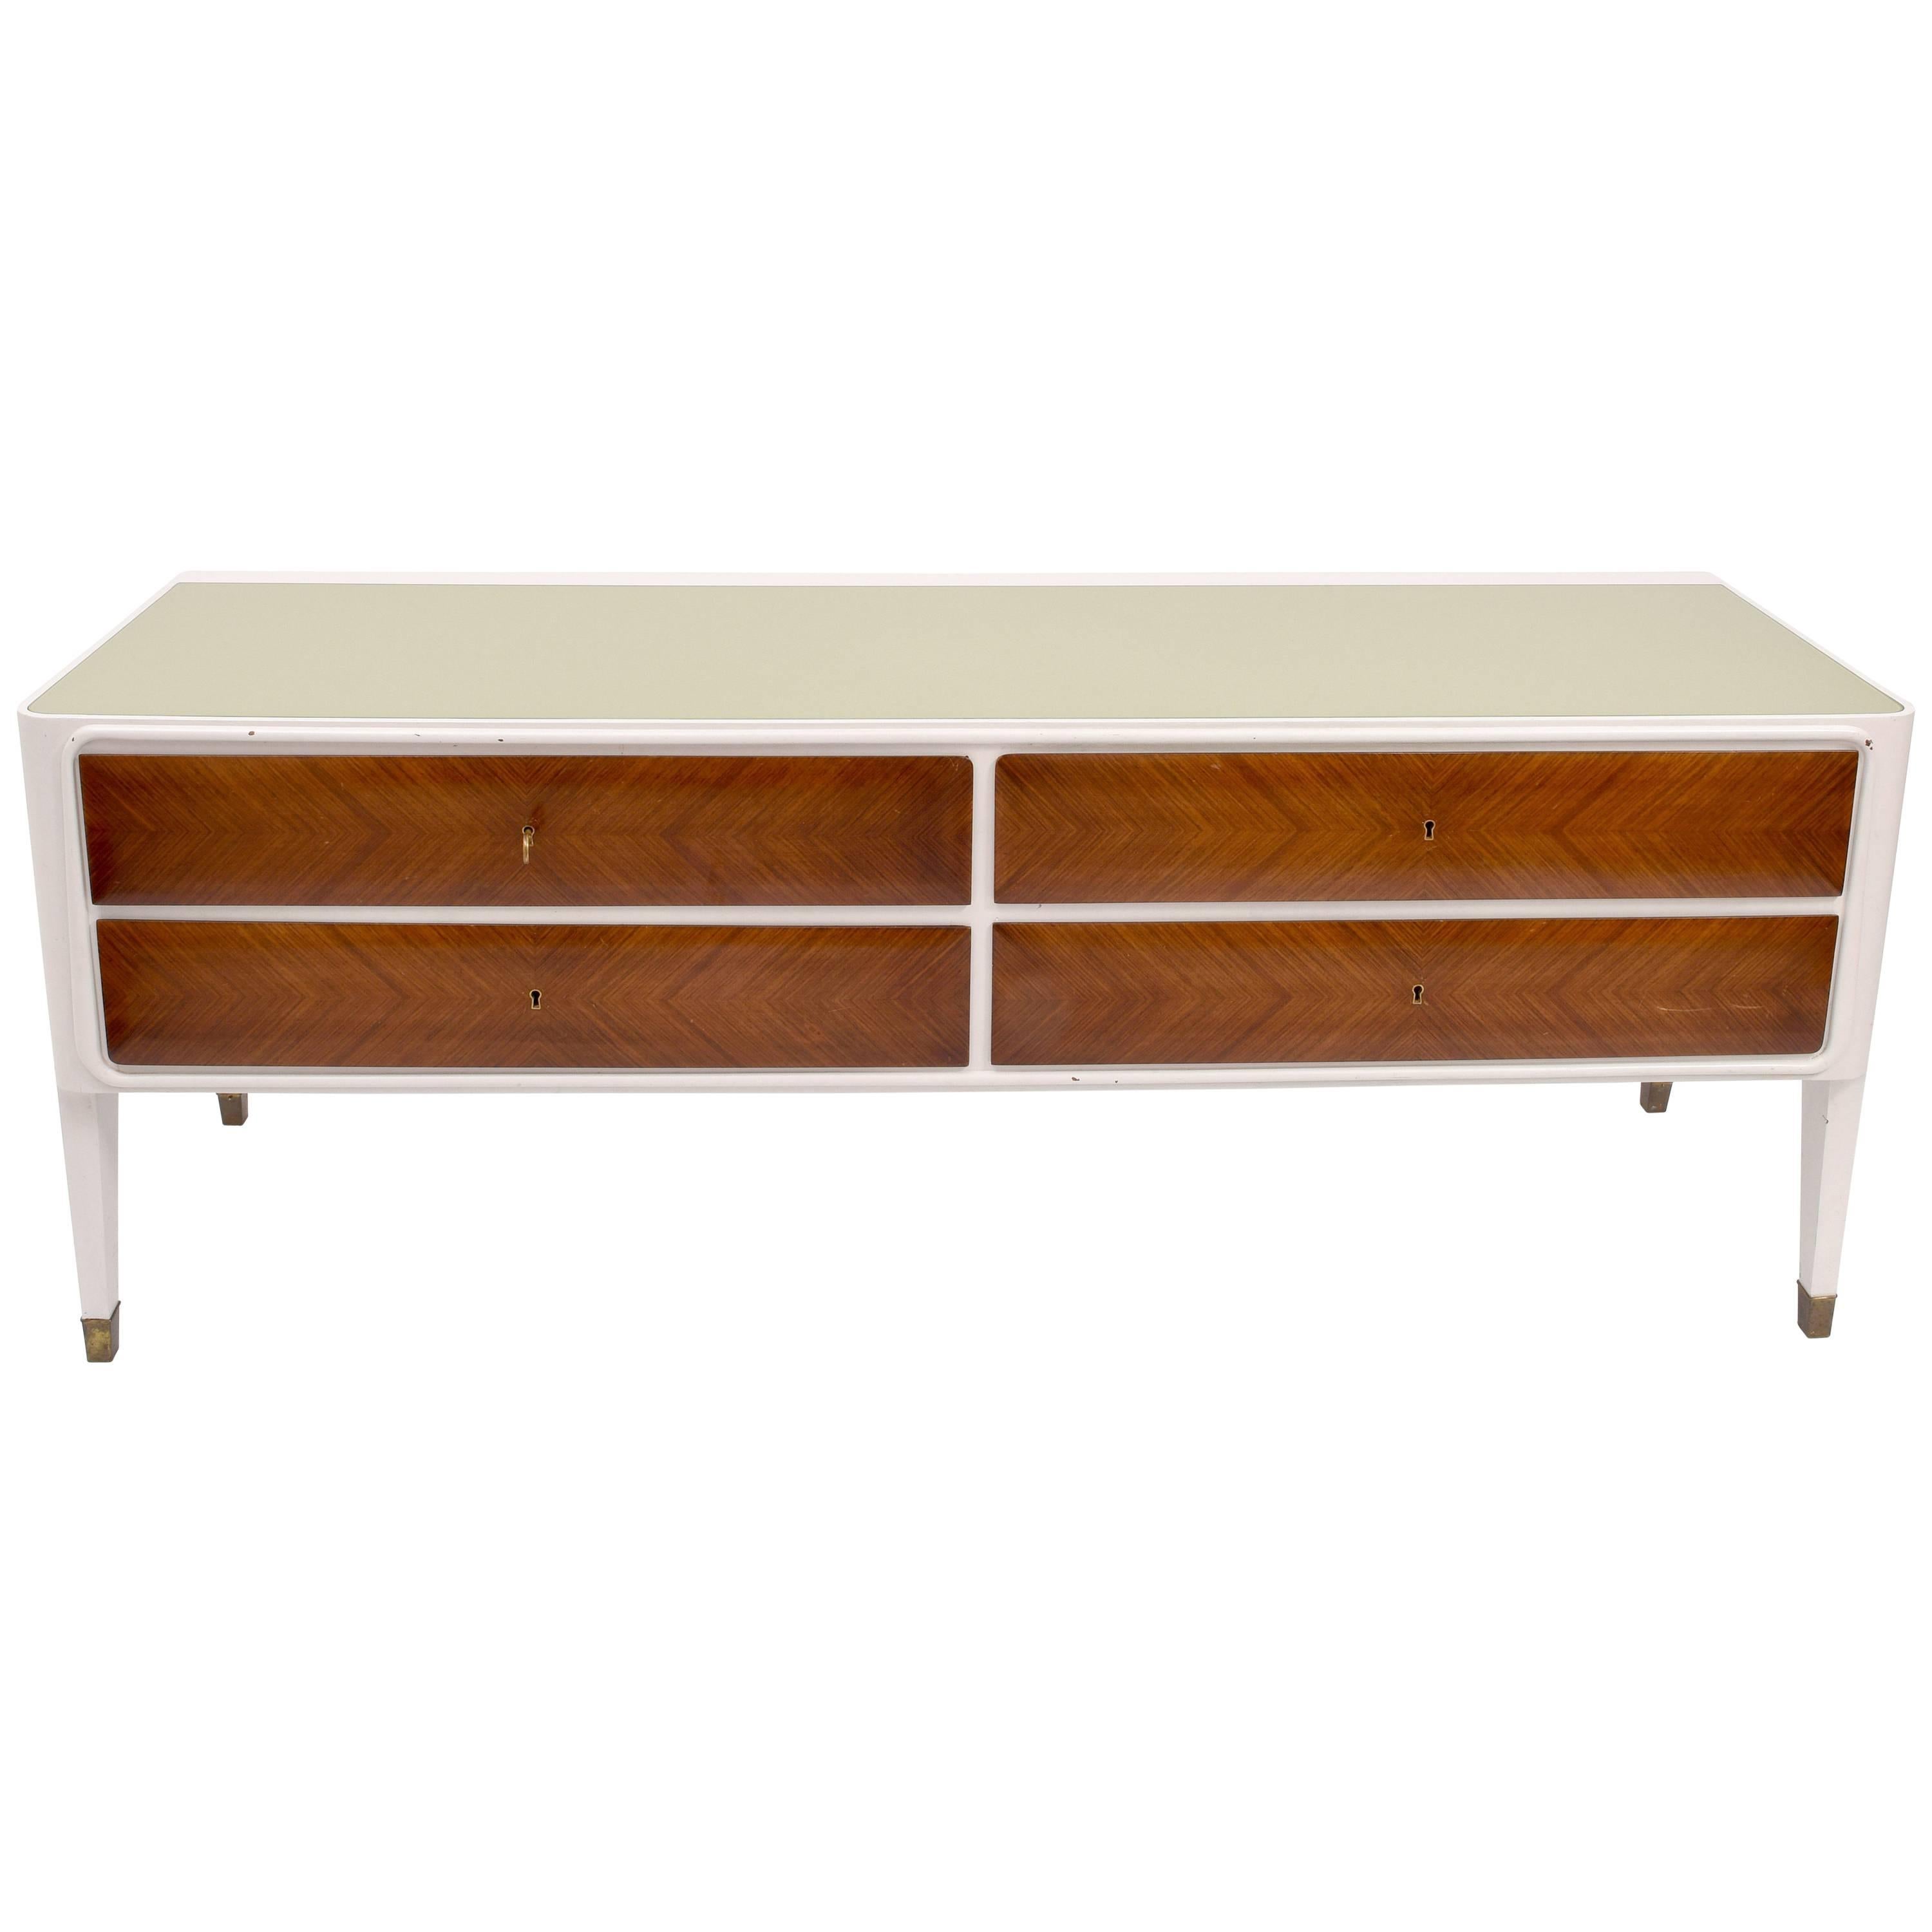 Italian Credenza Sideboard For Sale